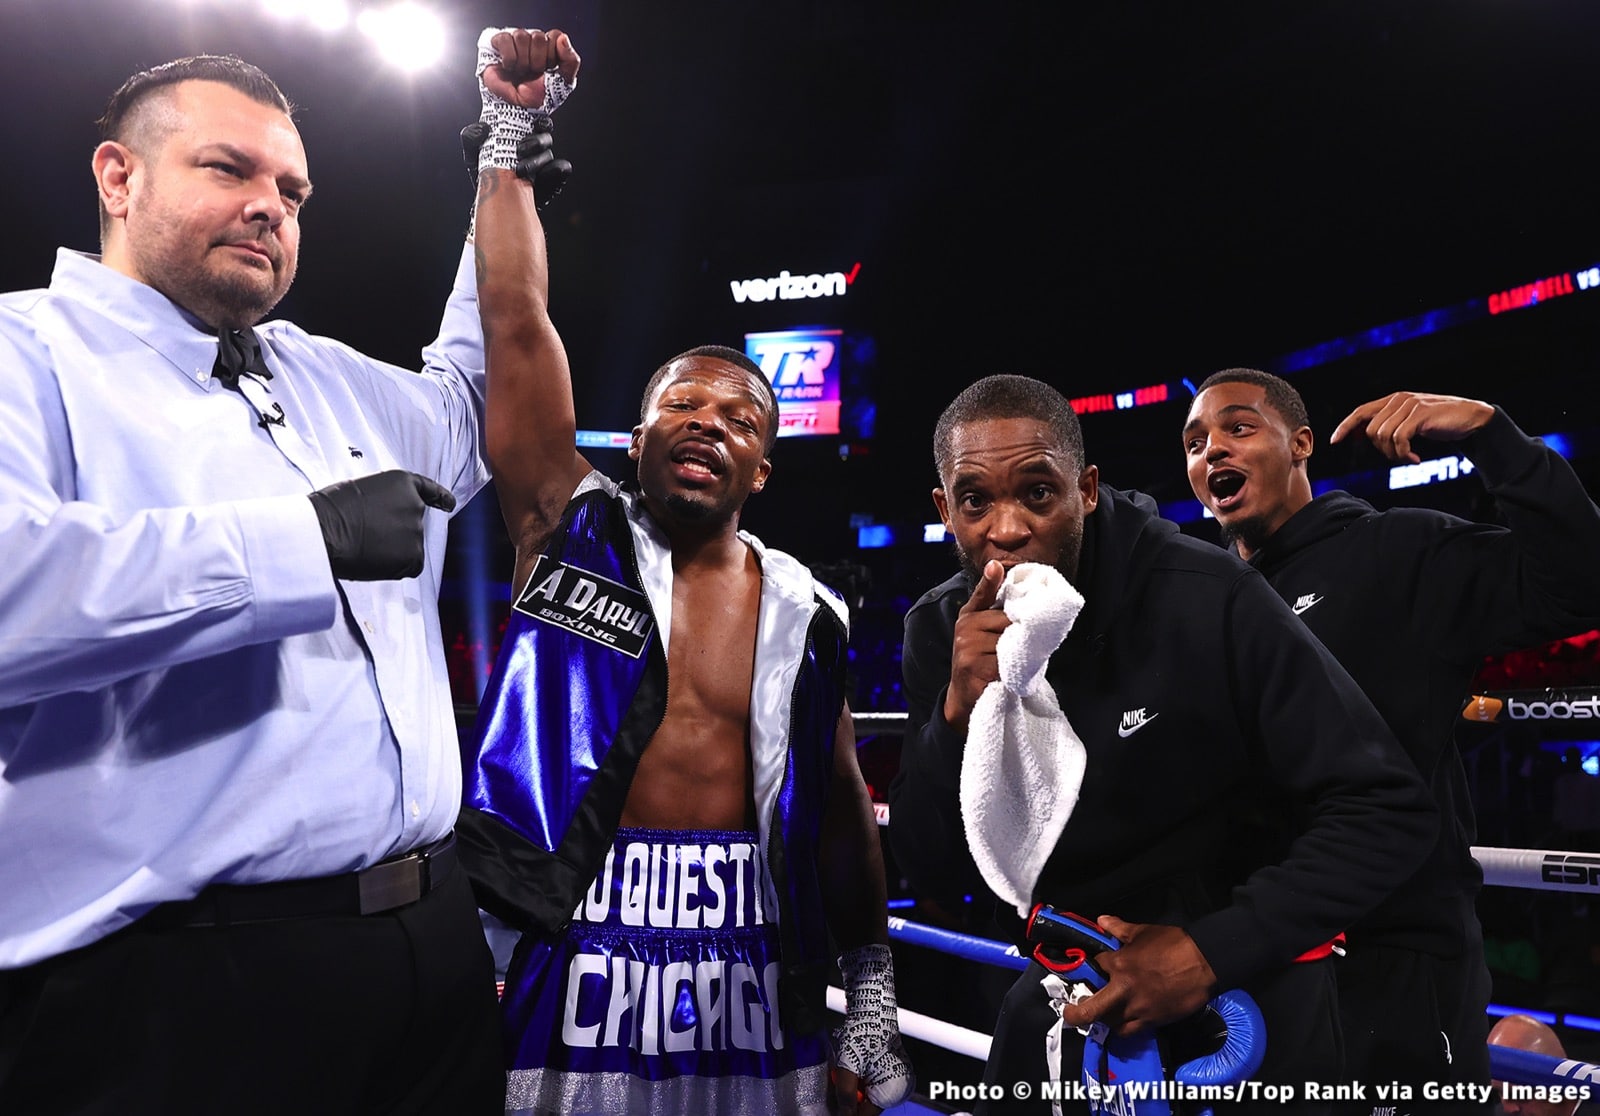 Image: Boxing Results: Jamel Herring Loses Title to Shakur Stevenson in Unified WBO title!